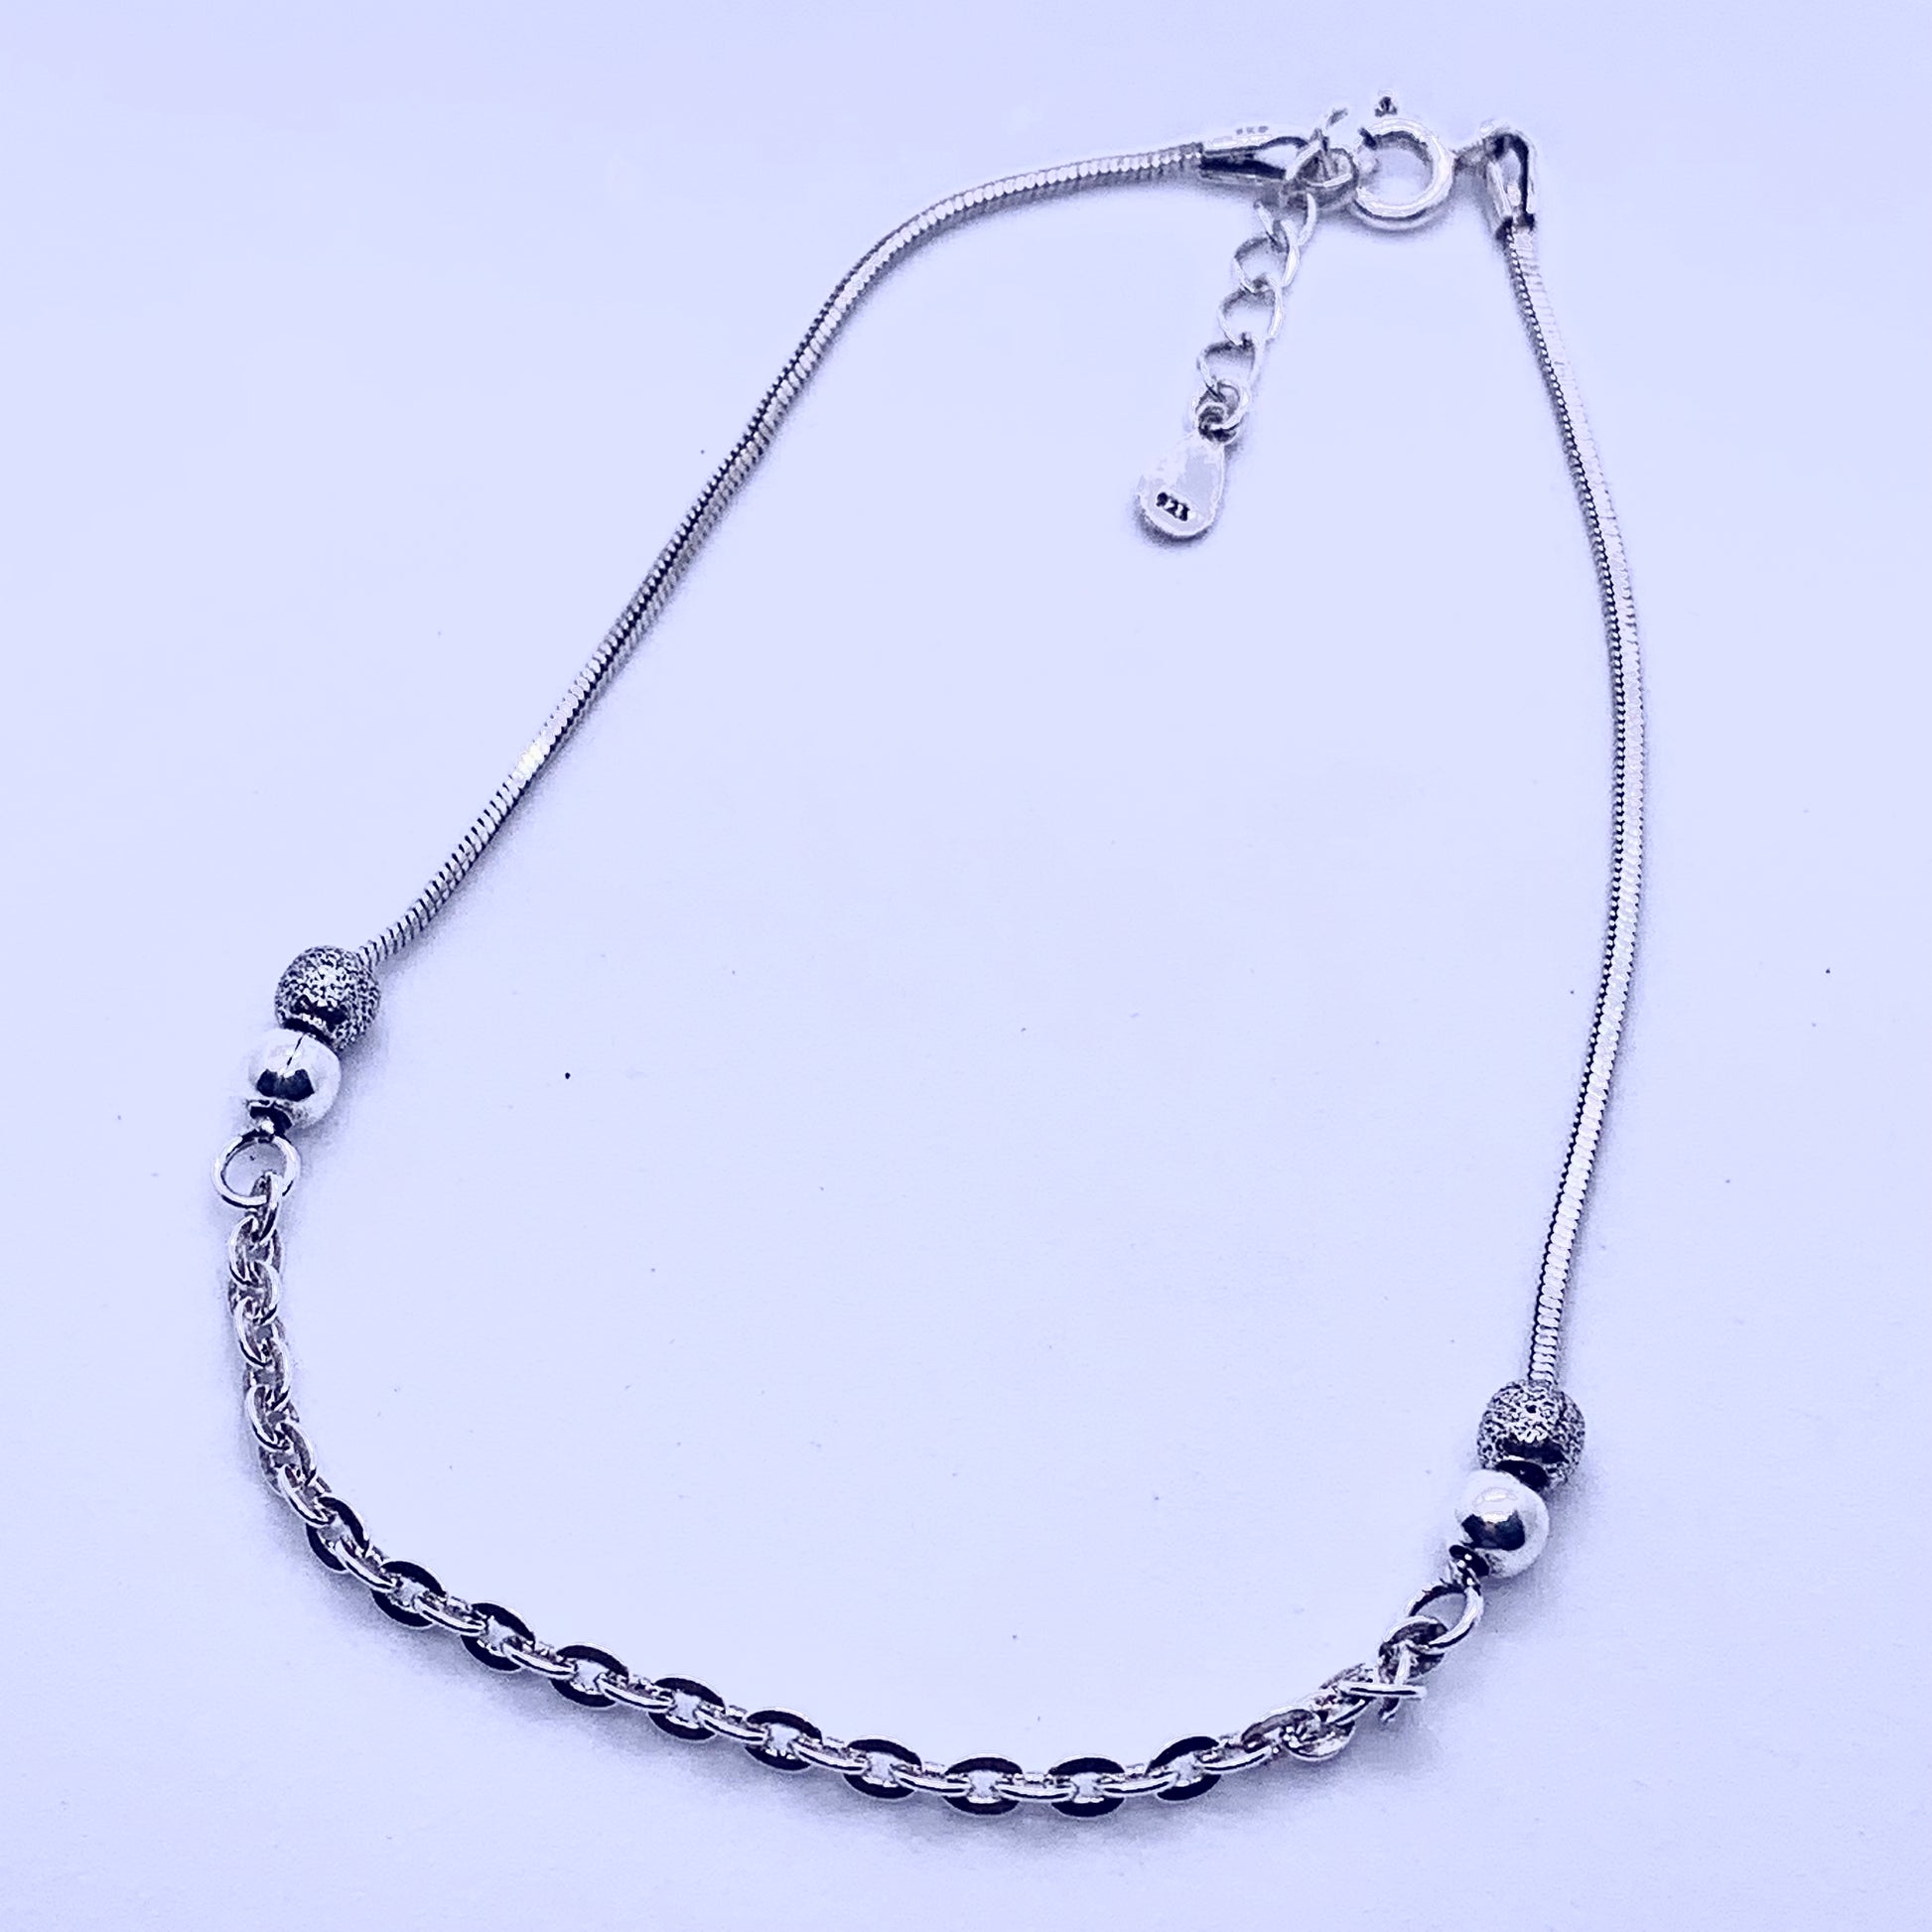 Beautiful Rope and Chain Pure Silver Anklet - Silver Jewelery 925